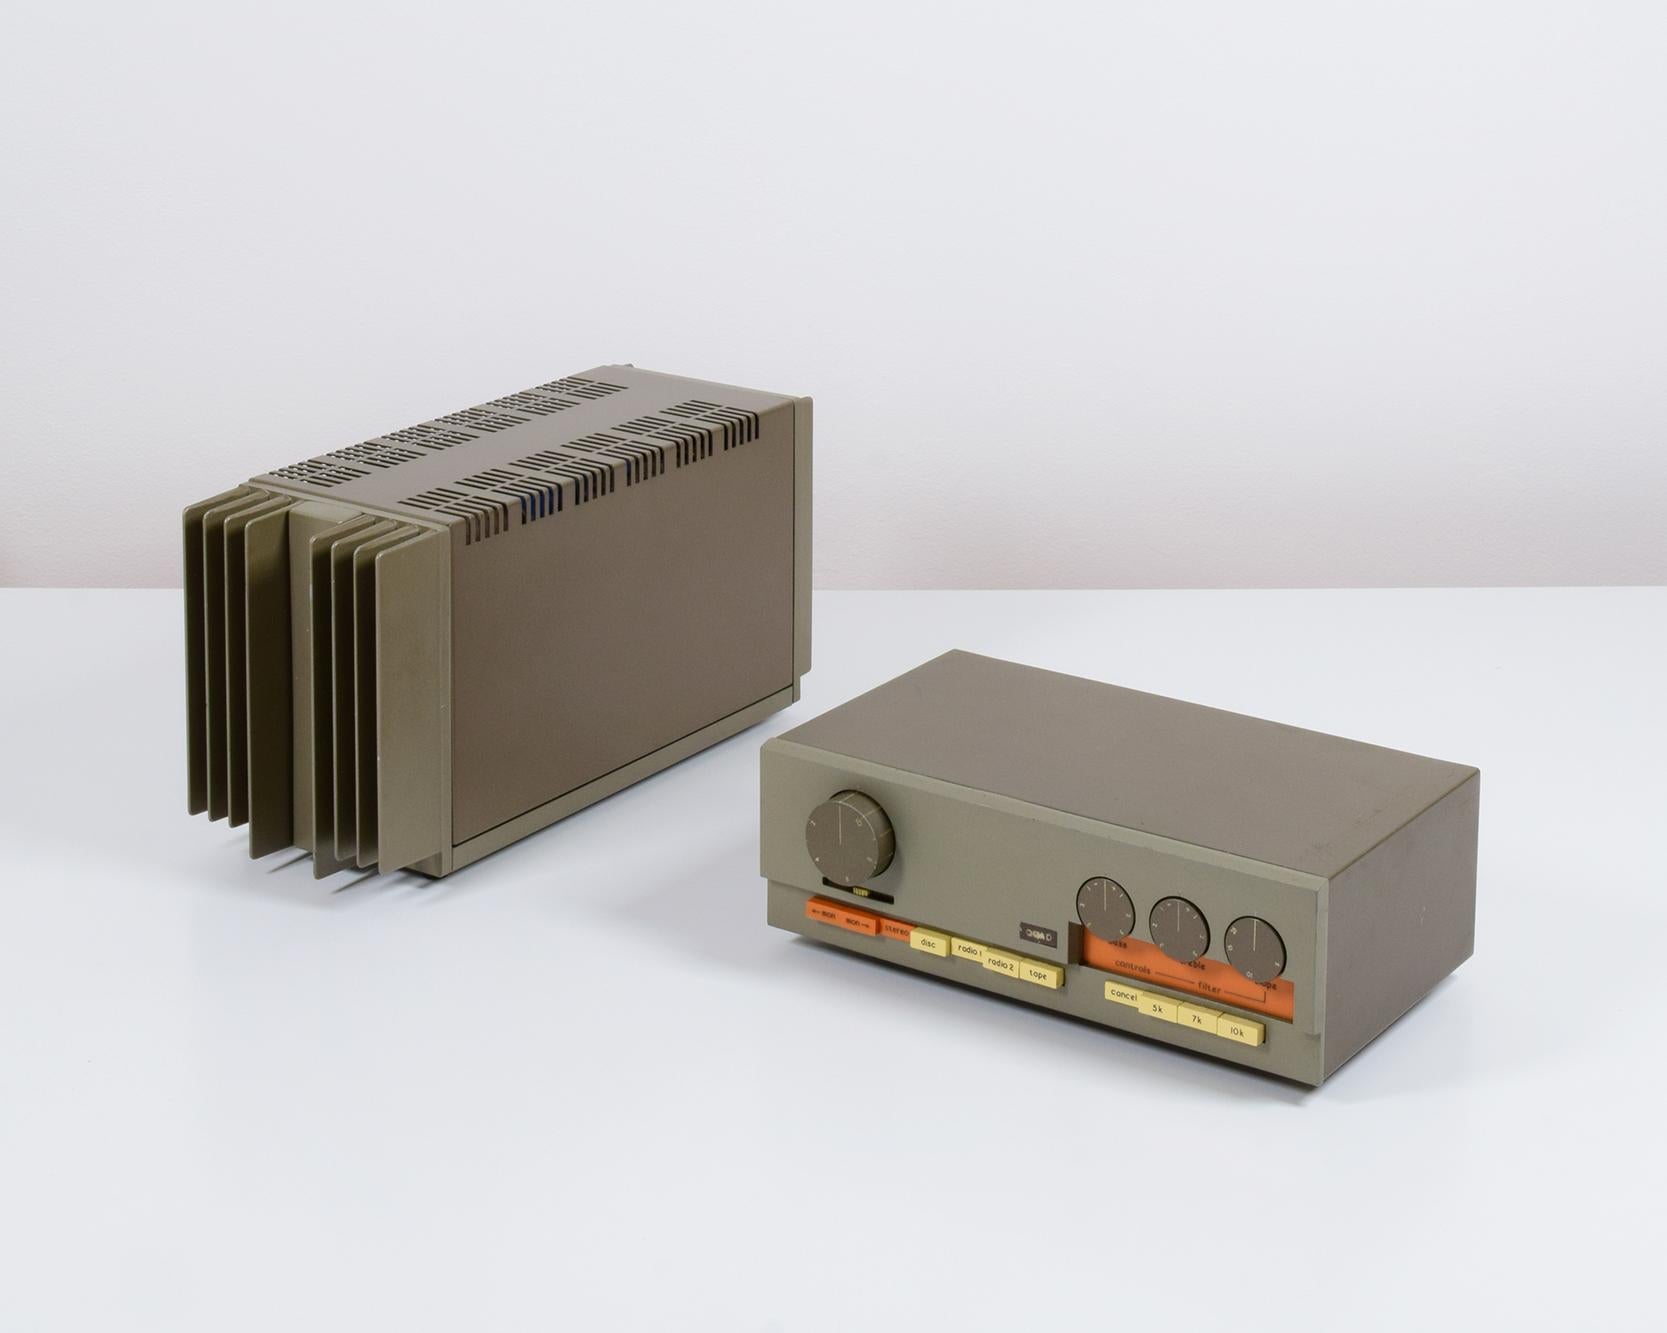 Quad Manufacturing Co Ltd, Huntingdon, UK

Quad 33 / 303, Control unit / pre-amplifier and power amplifier, 1967

A good example of this classic late 1960s design.

The 33/303 were the first transistorised amplifier system components produced